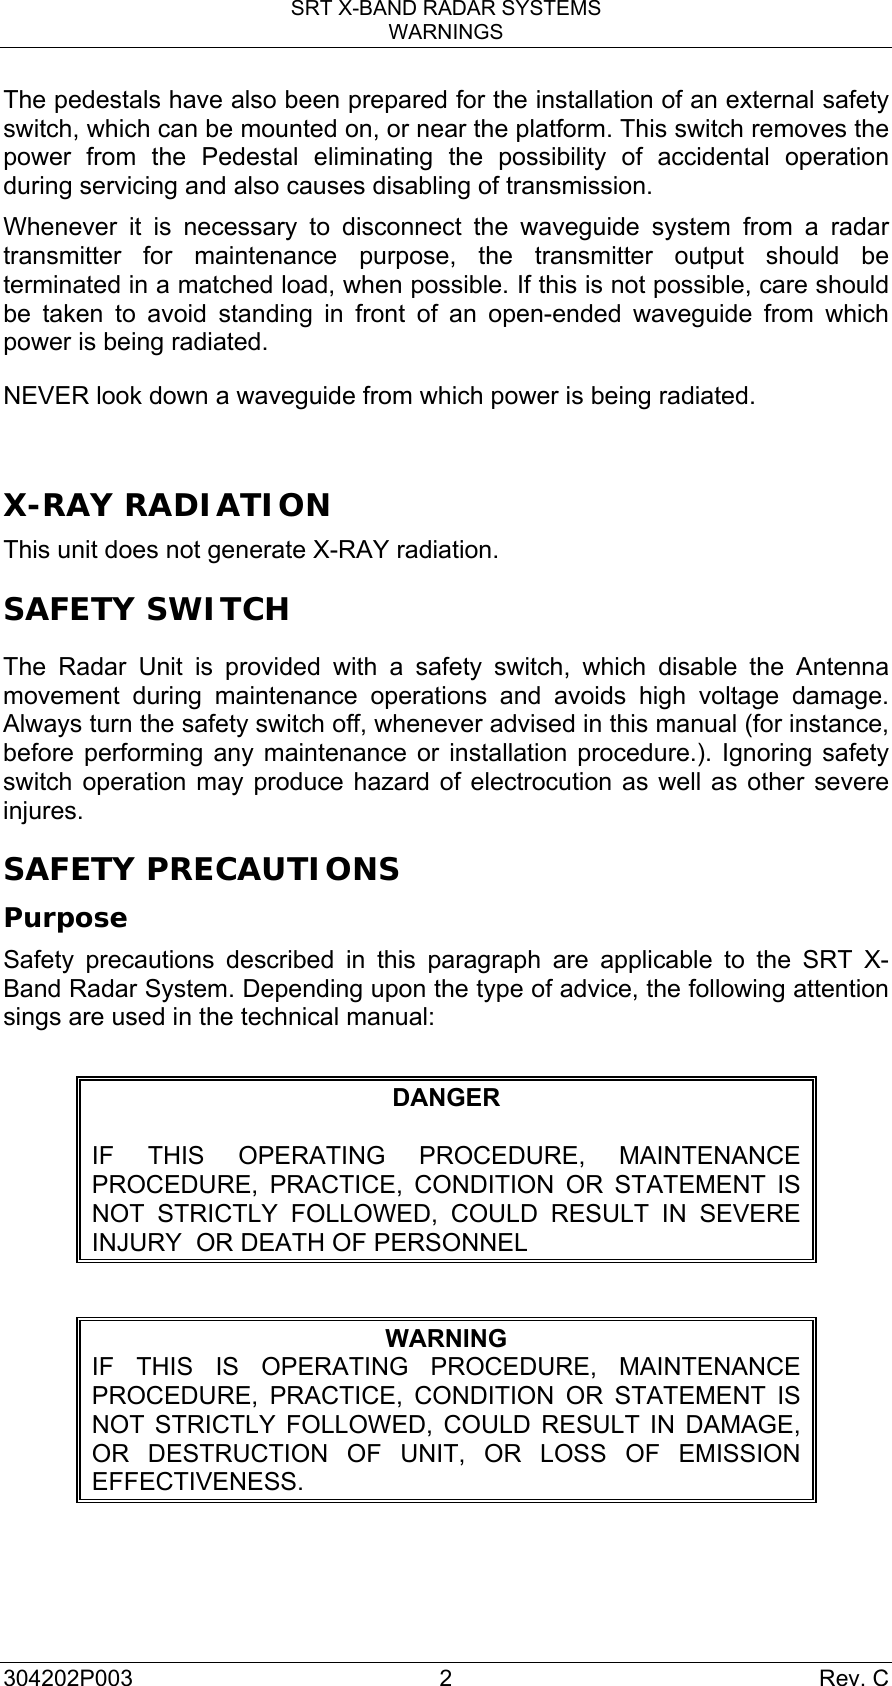 SRT X-BAND RADAR SYSTEMS WARNINGS 304202P003 2  Rev. C The pedestals have also been prepared for the installation of an external safety switch, which can be mounted on, or near the platform. This switch removes the power from the Pedestal eliminating the possibility of accidental operation during servicing and also causes disabling of transmission. Whenever it is necessary to disconnect the waveguide system from a radar transmitter for maintenance purpose, the transmitter output should be terminated in a matched load, when possible. If this is not possible, care should be taken to avoid standing in front of an open-ended waveguide from which power is being radiated. NEVER look down a waveguide from which power is being radiated.  X-RAY RADIATION This unit does not generate X-RAY radiation.  SAFETY SWITCH The Radar Unit is provided with a safety switch, which disable the Antenna movement during maintenance operations and avoids high voltage damage. Always turn the safety switch off, whenever advised in this manual (for instance, before performing any maintenance or installation procedure.). Ignoring safety switch operation may produce hazard of electrocution as well as other severe injures. SAFETY PRECAUTIONS Purpose Safety precautions described in this paragraph are applicable to the SRT X-Band Radar System. Depending upon the type of advice, the following attention sings are used in the technical manual:  DANGER  IF THIS OPERATING PROCEDURE, MAINTENANCE PROCEDURE, PRACTICE, CONDITION OR STATEMENT IS NOT STRICTLY FOLLOWED, COULD RESULT IN SEVERE INJURY  OR DEATH OF PERSONNEL  WARNING IF THIS IS OPERATING PROCEDURE, MAINTENANCE PROCEDURE, PRACTICE, CONDITION OR STATEMENT IS NOT STRICTLY FOLLOWED, COULD RESULT IN DAMAGE, OR DESTRUCTION OF UNIT, OR LOSS OF EMISSION EFFECTIVENESS.    